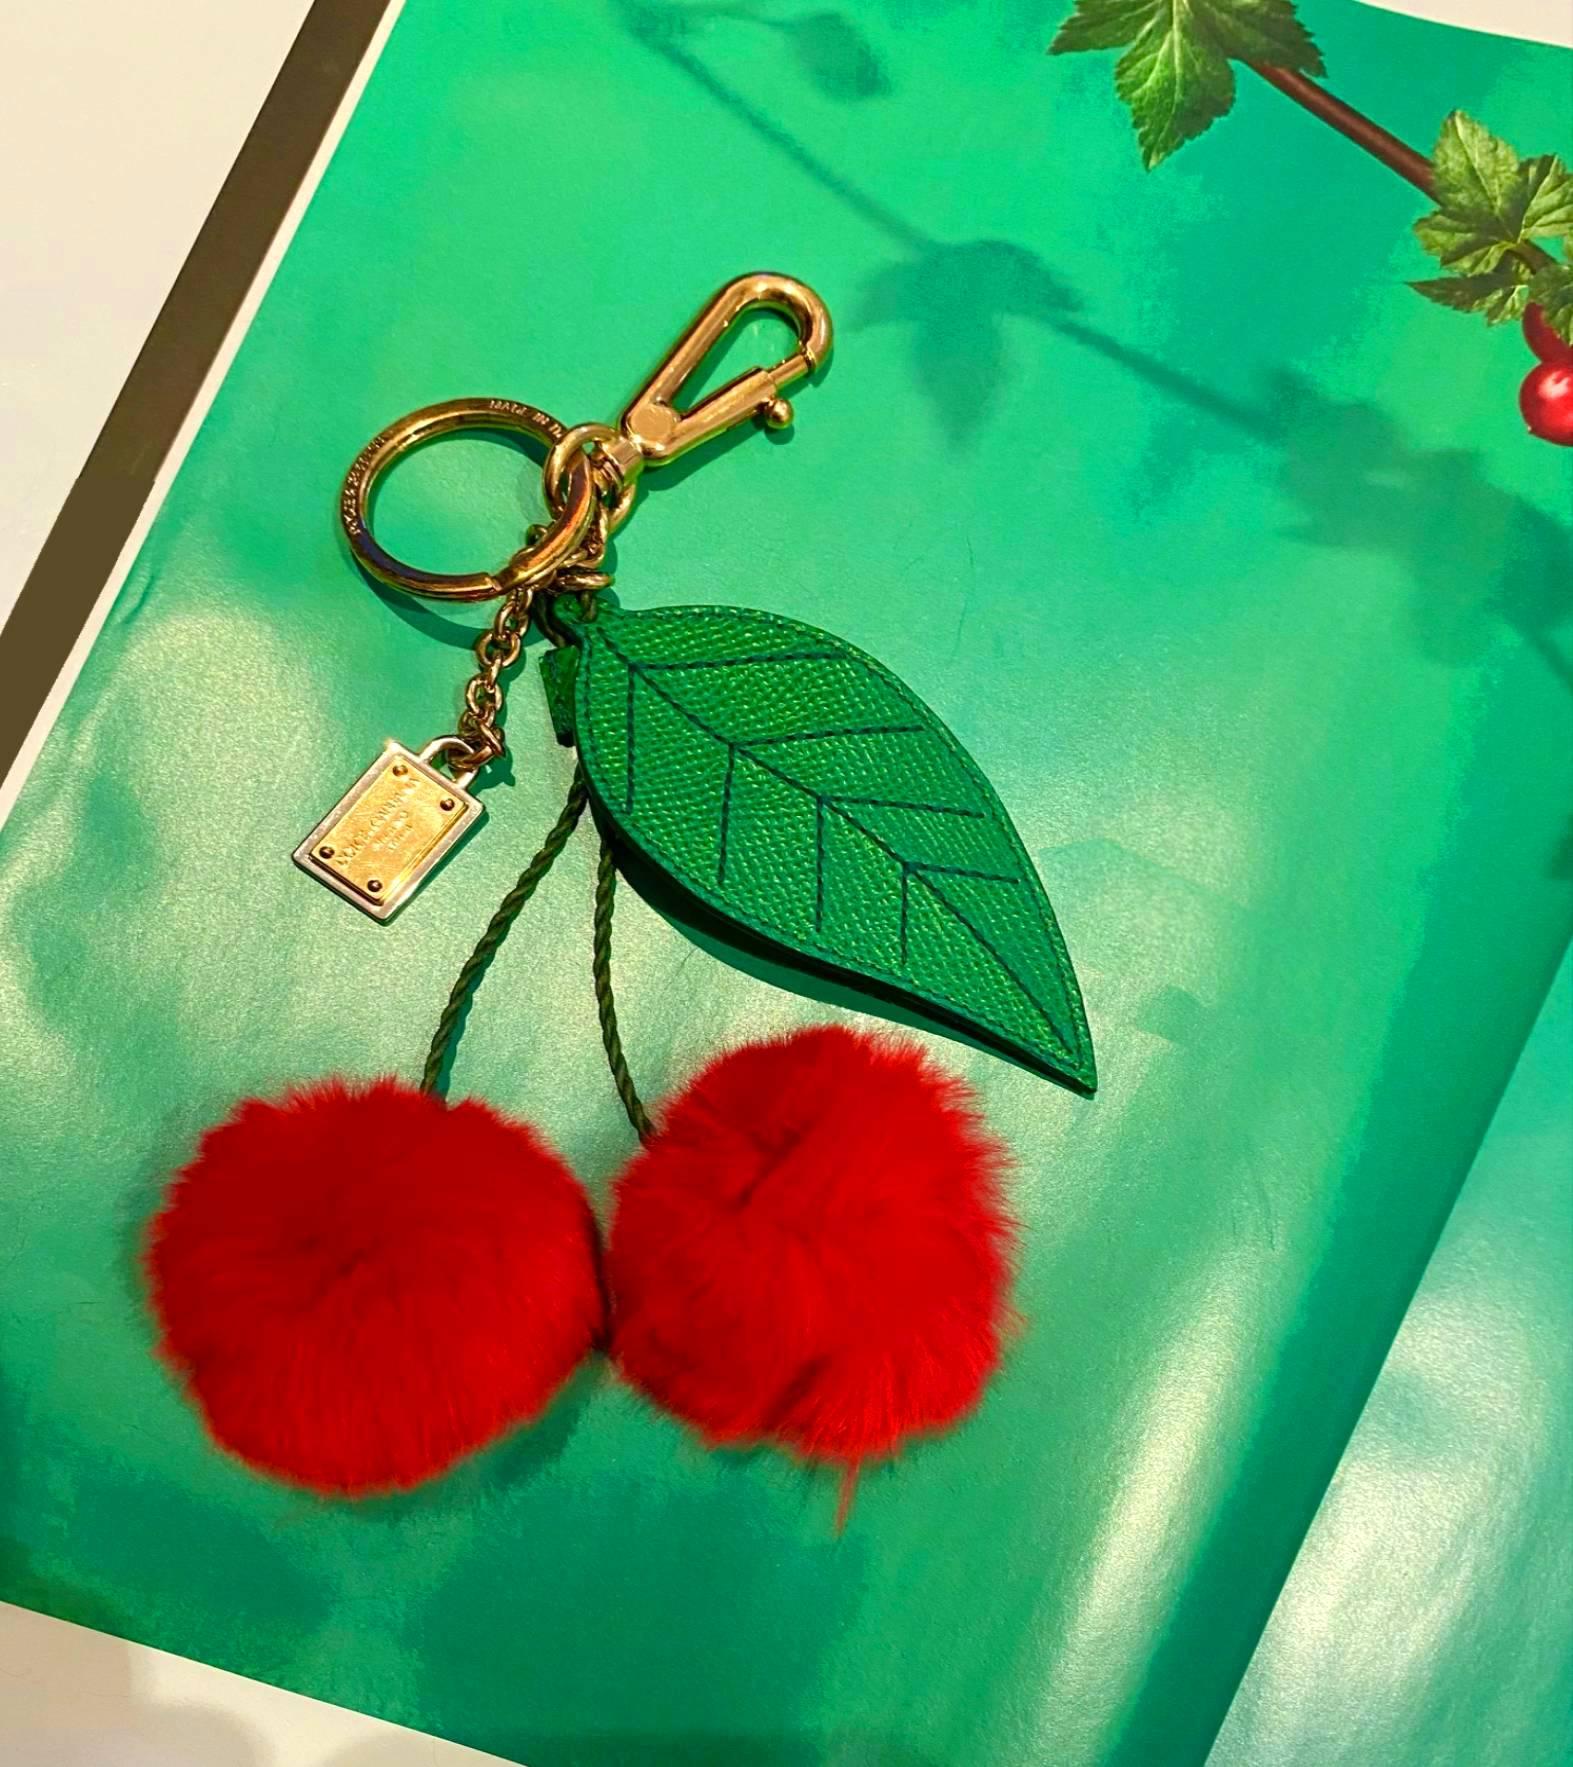 This Dolce & Gabbana charm for example, is so unbelievably pretty. It has two cherry pom poms made of fur and a green leather leaf, all held by gold-tone clasps. You can use it as a bag charm or a key ring.

Hardware: Gold Tone
Exterior Material: